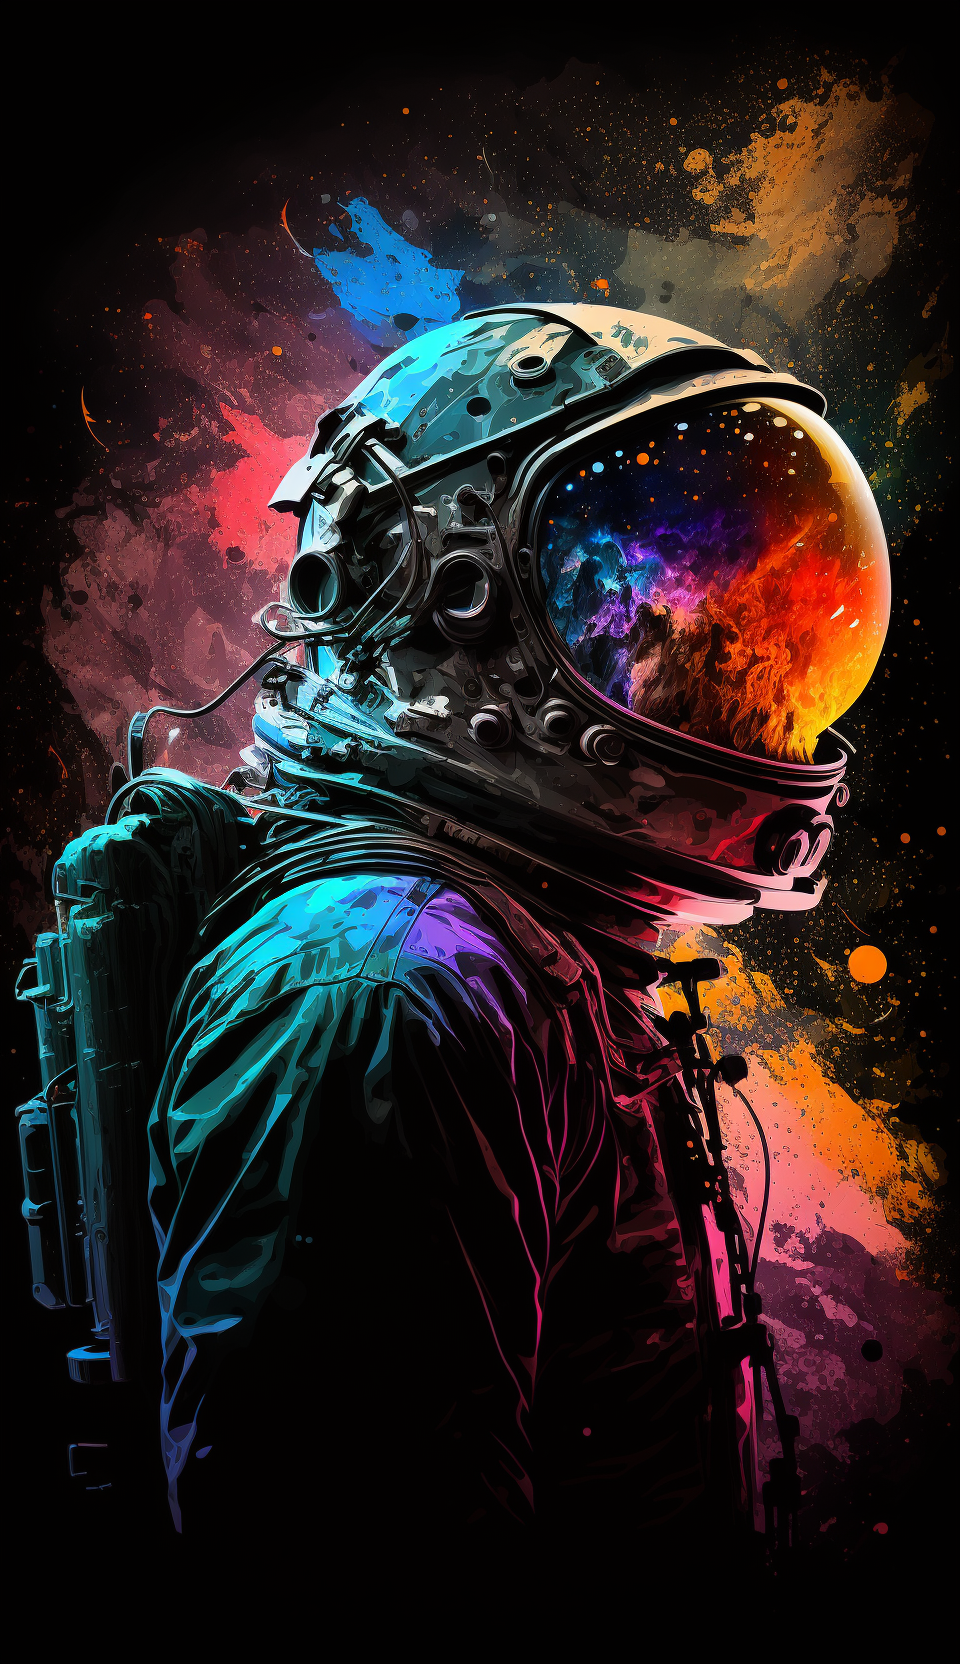 soupcan13_astronaught_looking_into_space_beautiful_colors_c3d3e7f6-f75e-47a2-a0ca-822baa36b7ae.png